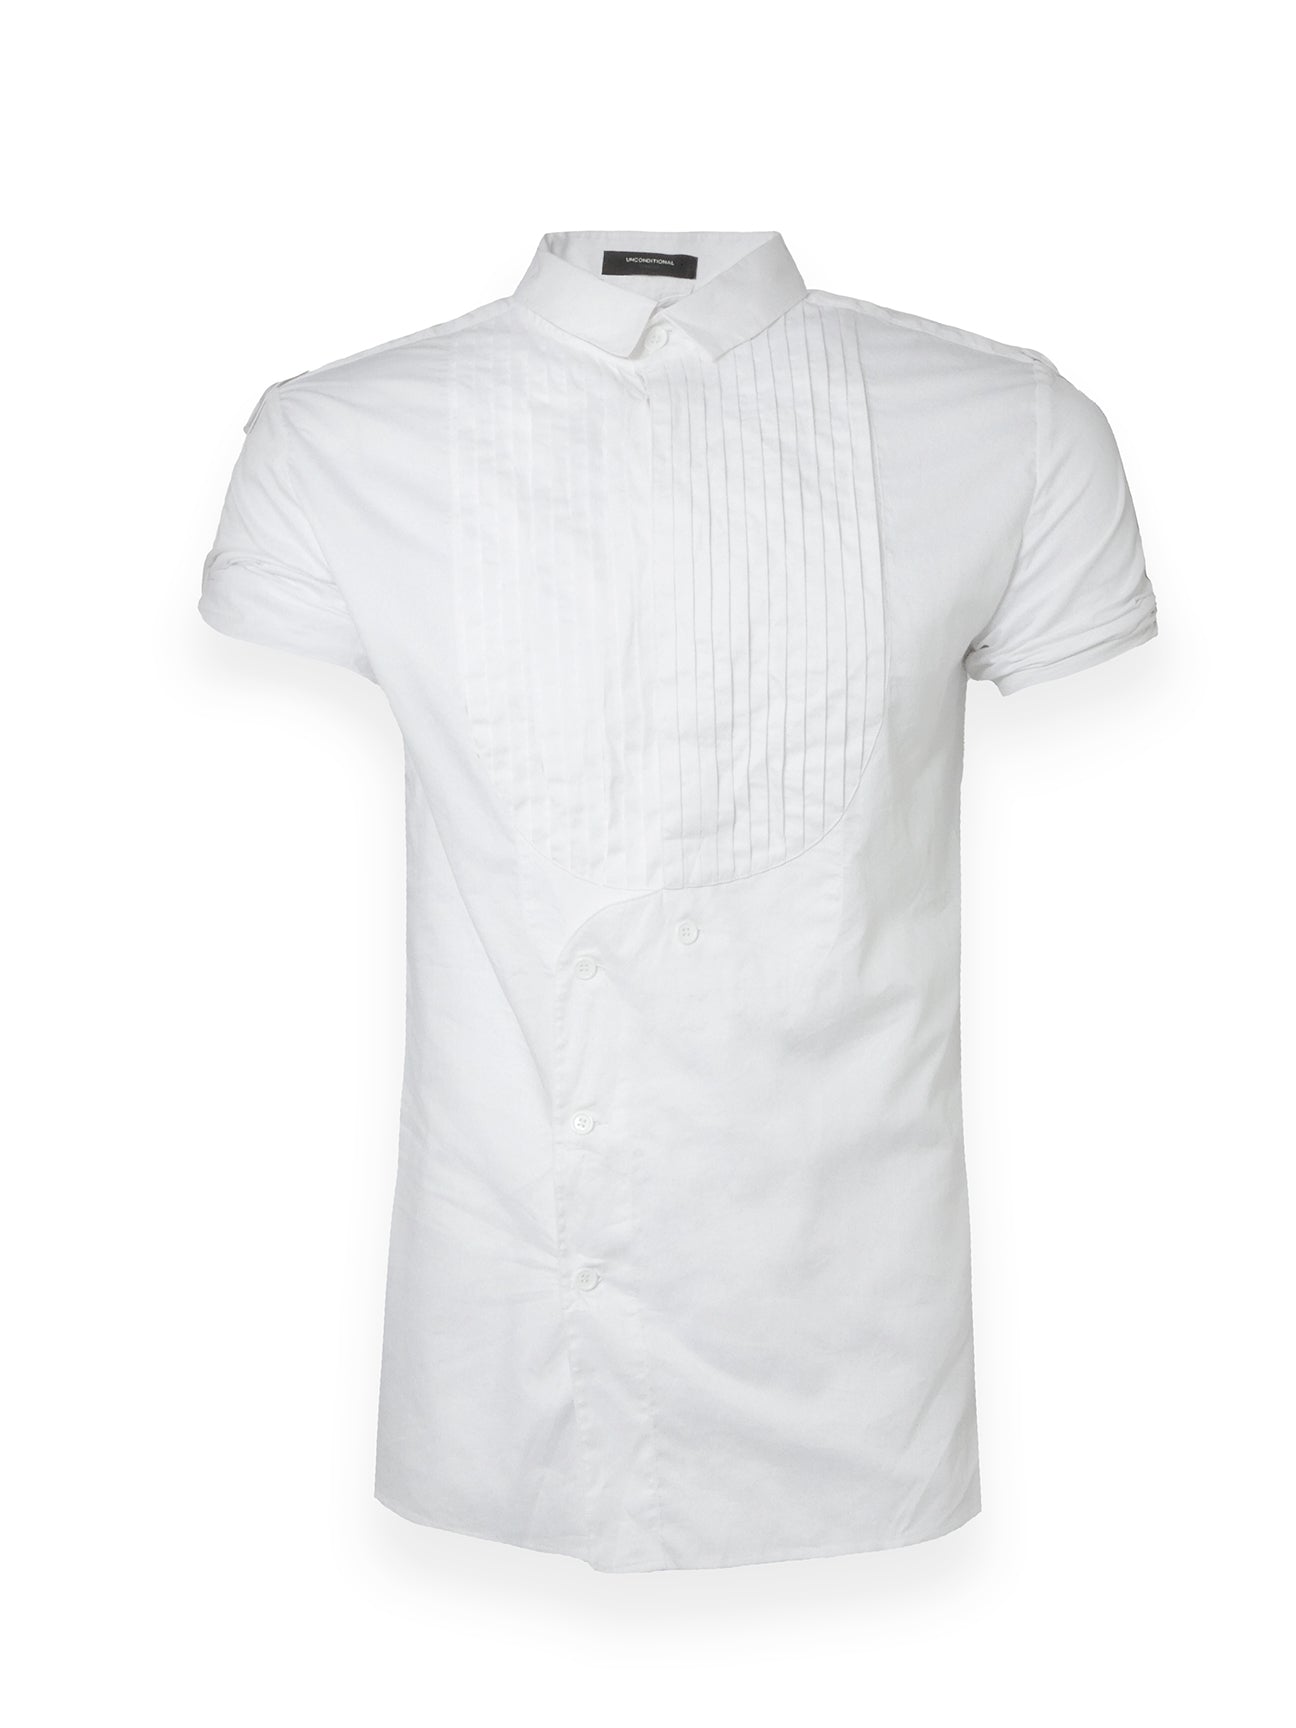 White Formal Shirt with Button Up Sleeves